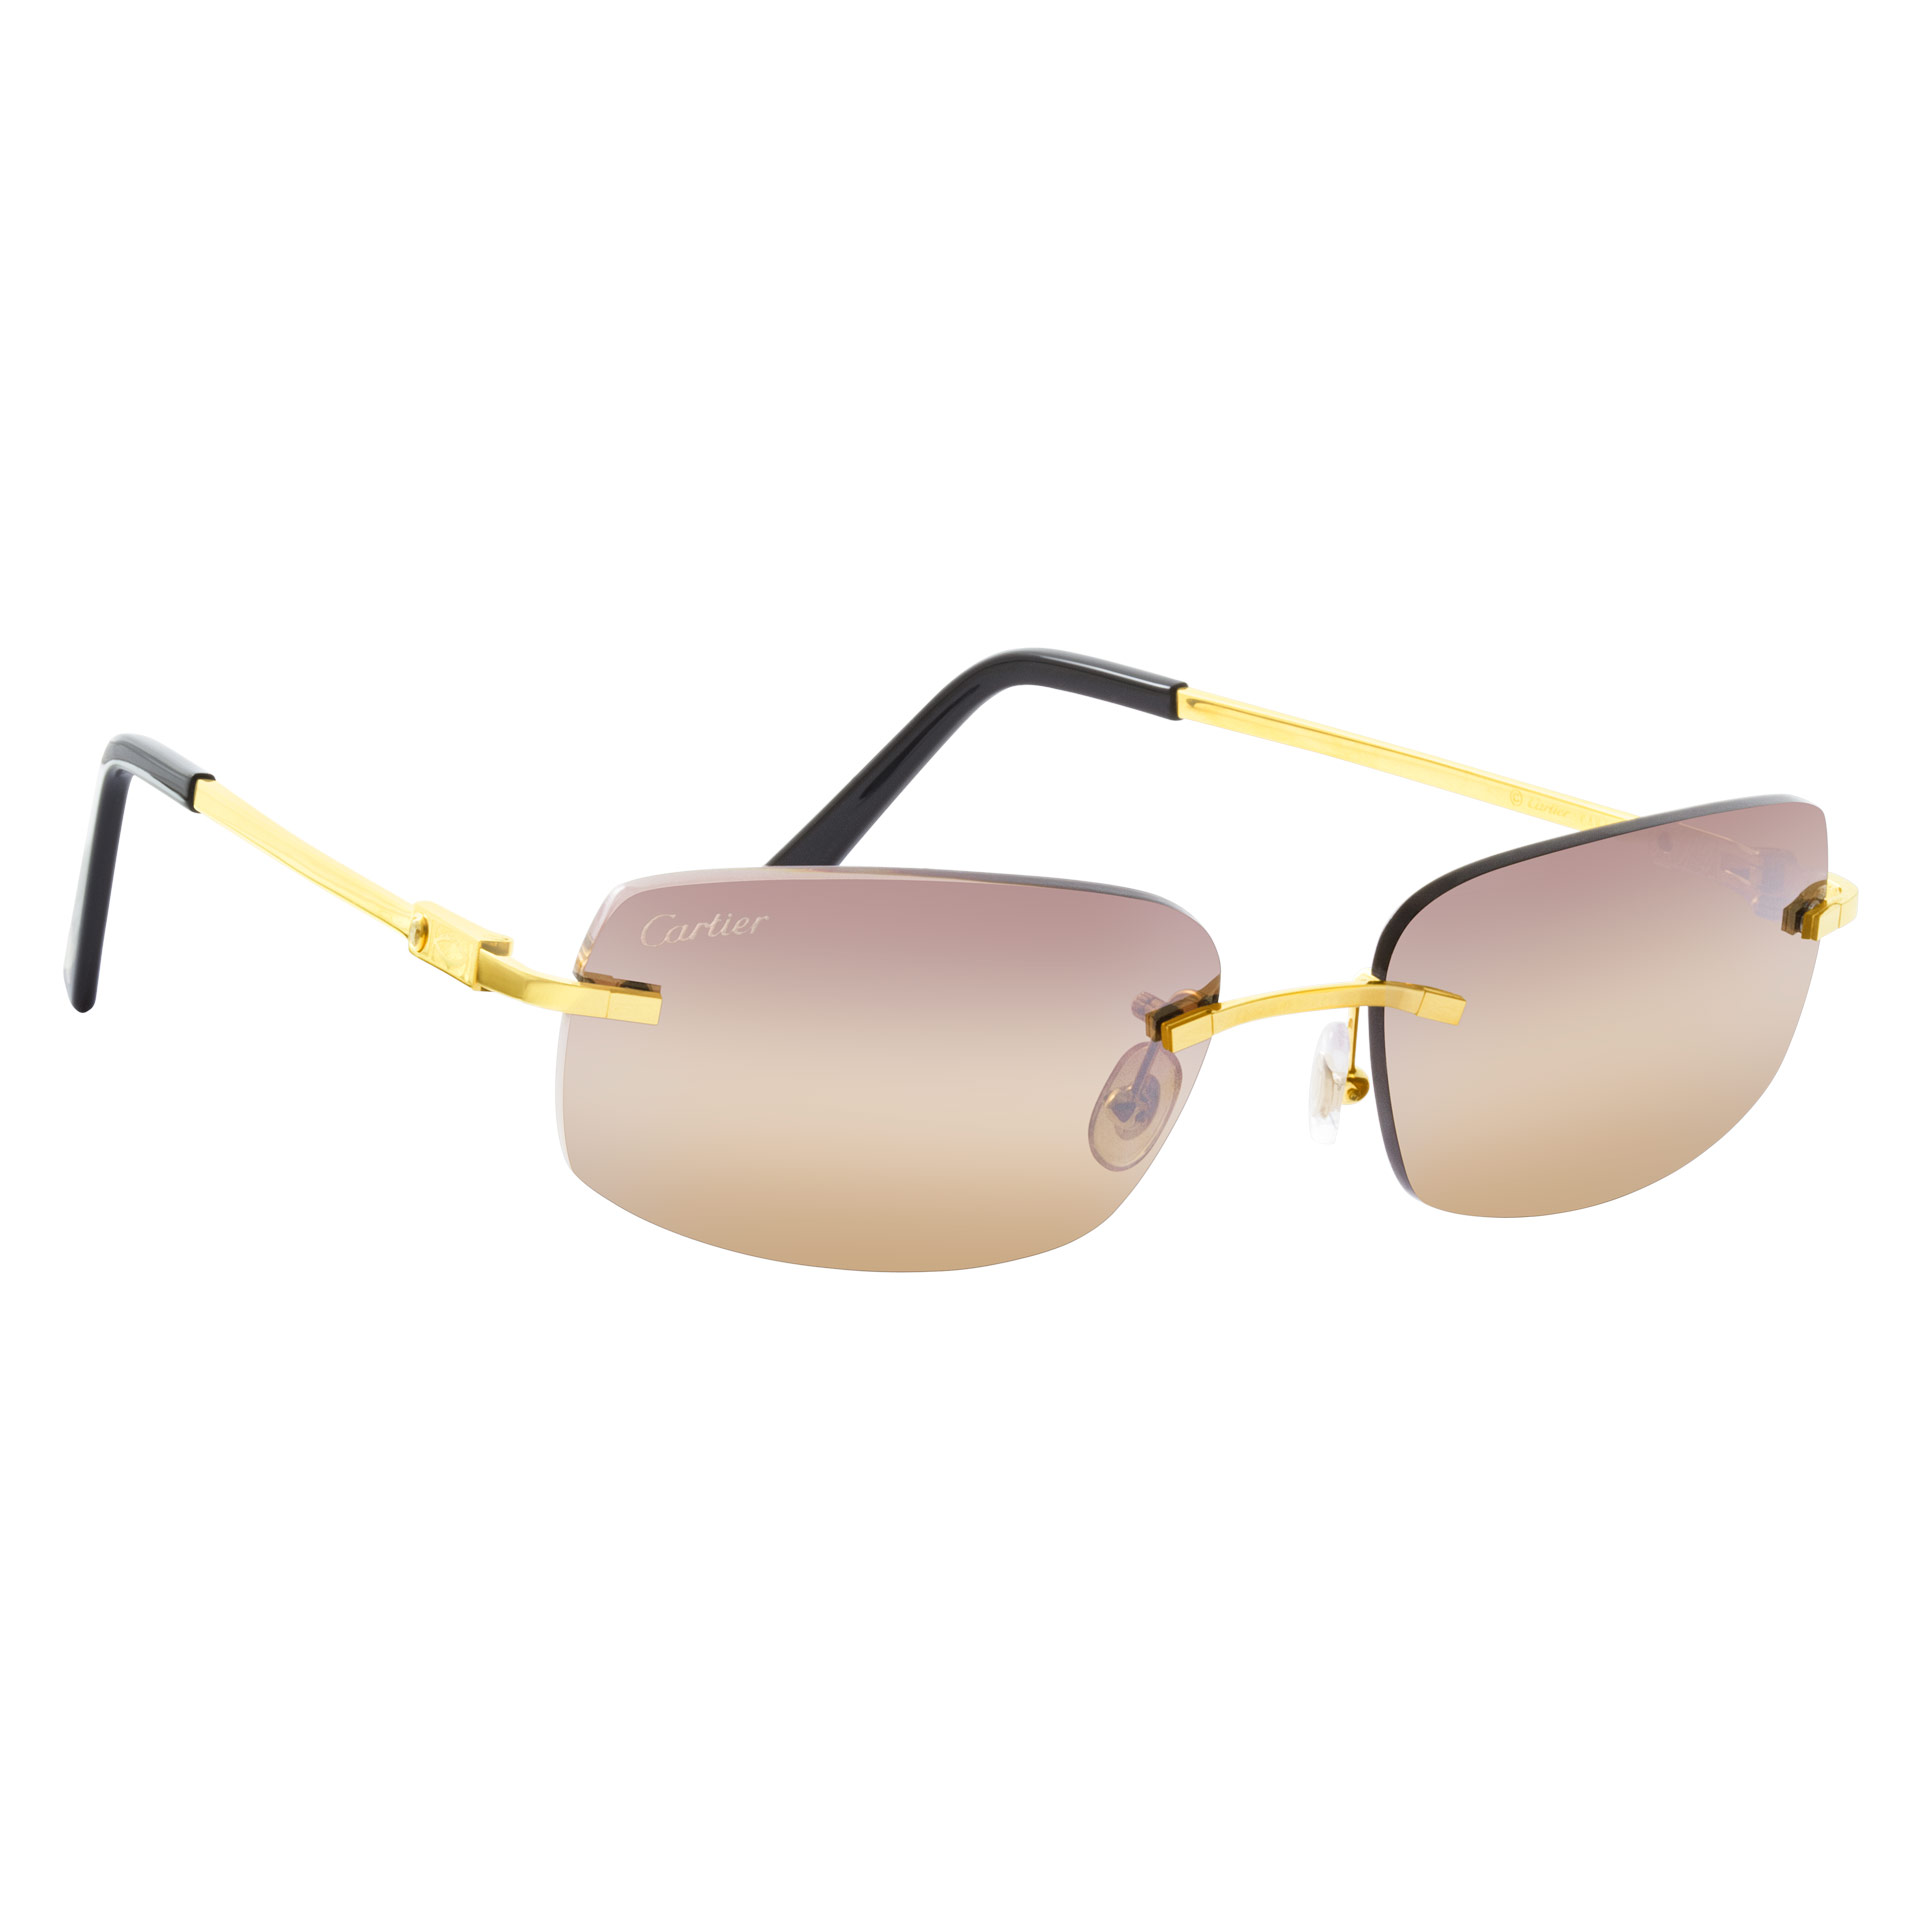 Cartier glasses in 18k gold plated frame with diamond accent at the temple image 2